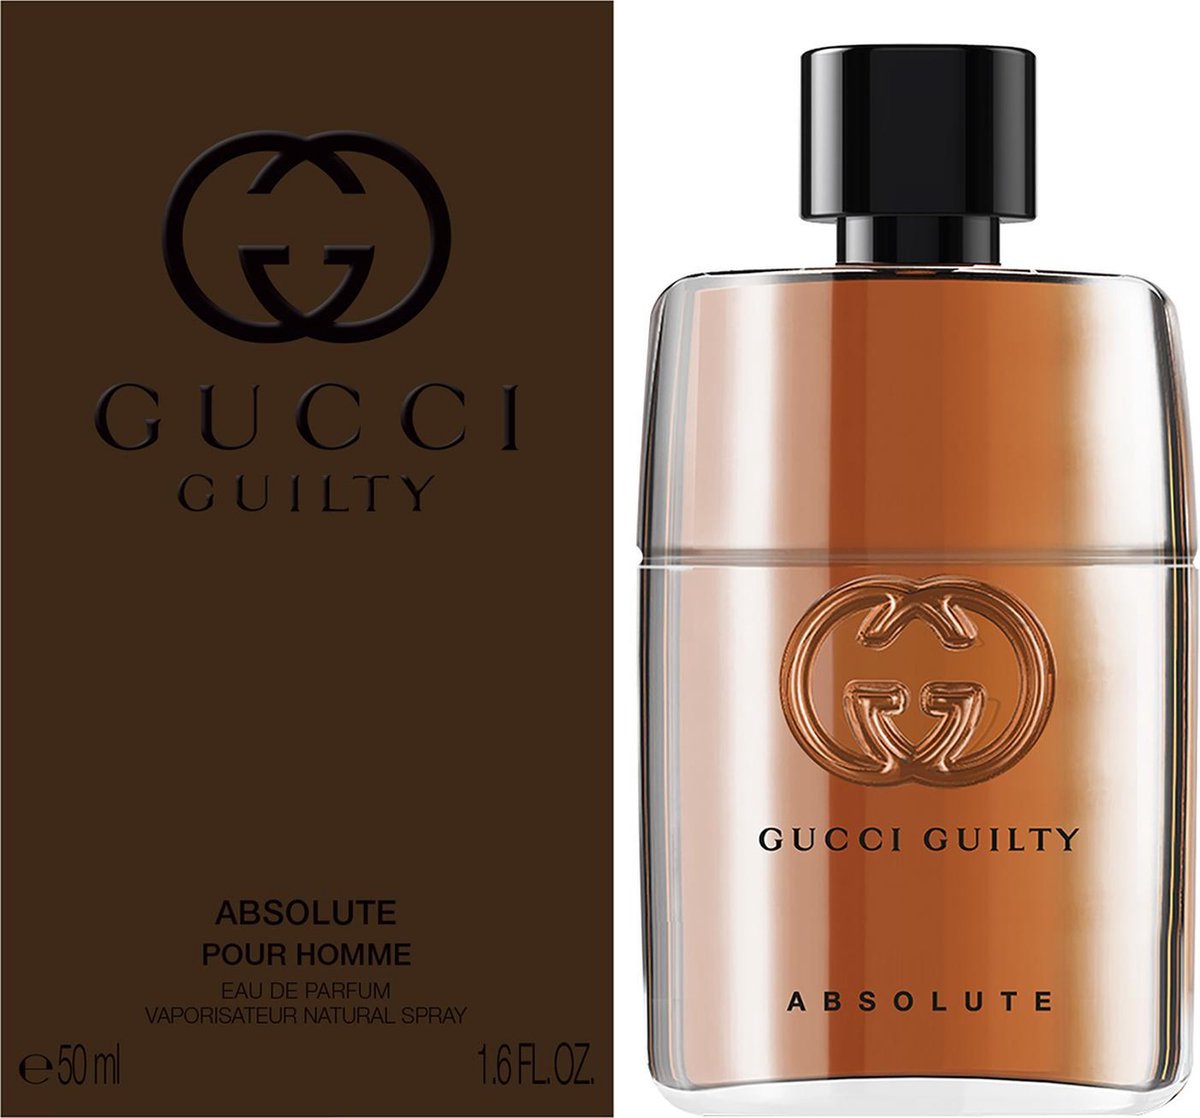 Gucci guilty absolute pour homme 50ml. Gucci guilty absolute pour homme. Gucci guilty Parfum pour homme. Gucci guilty absolute pour